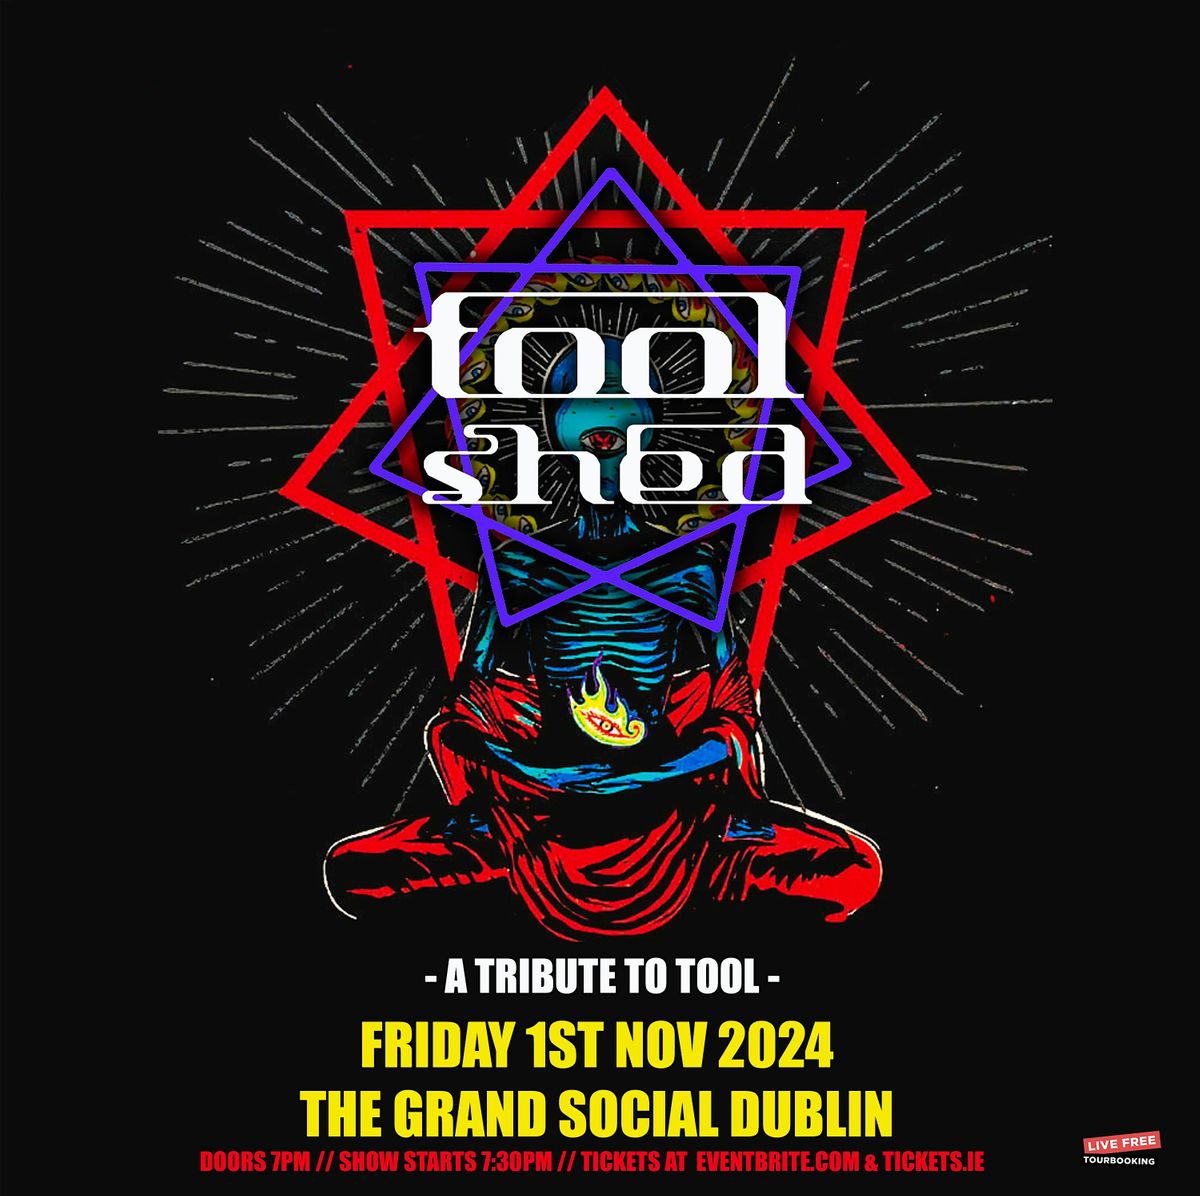 Tool Shed - A tribute to Tool at The Grand Social Dublin 1\/11\/24